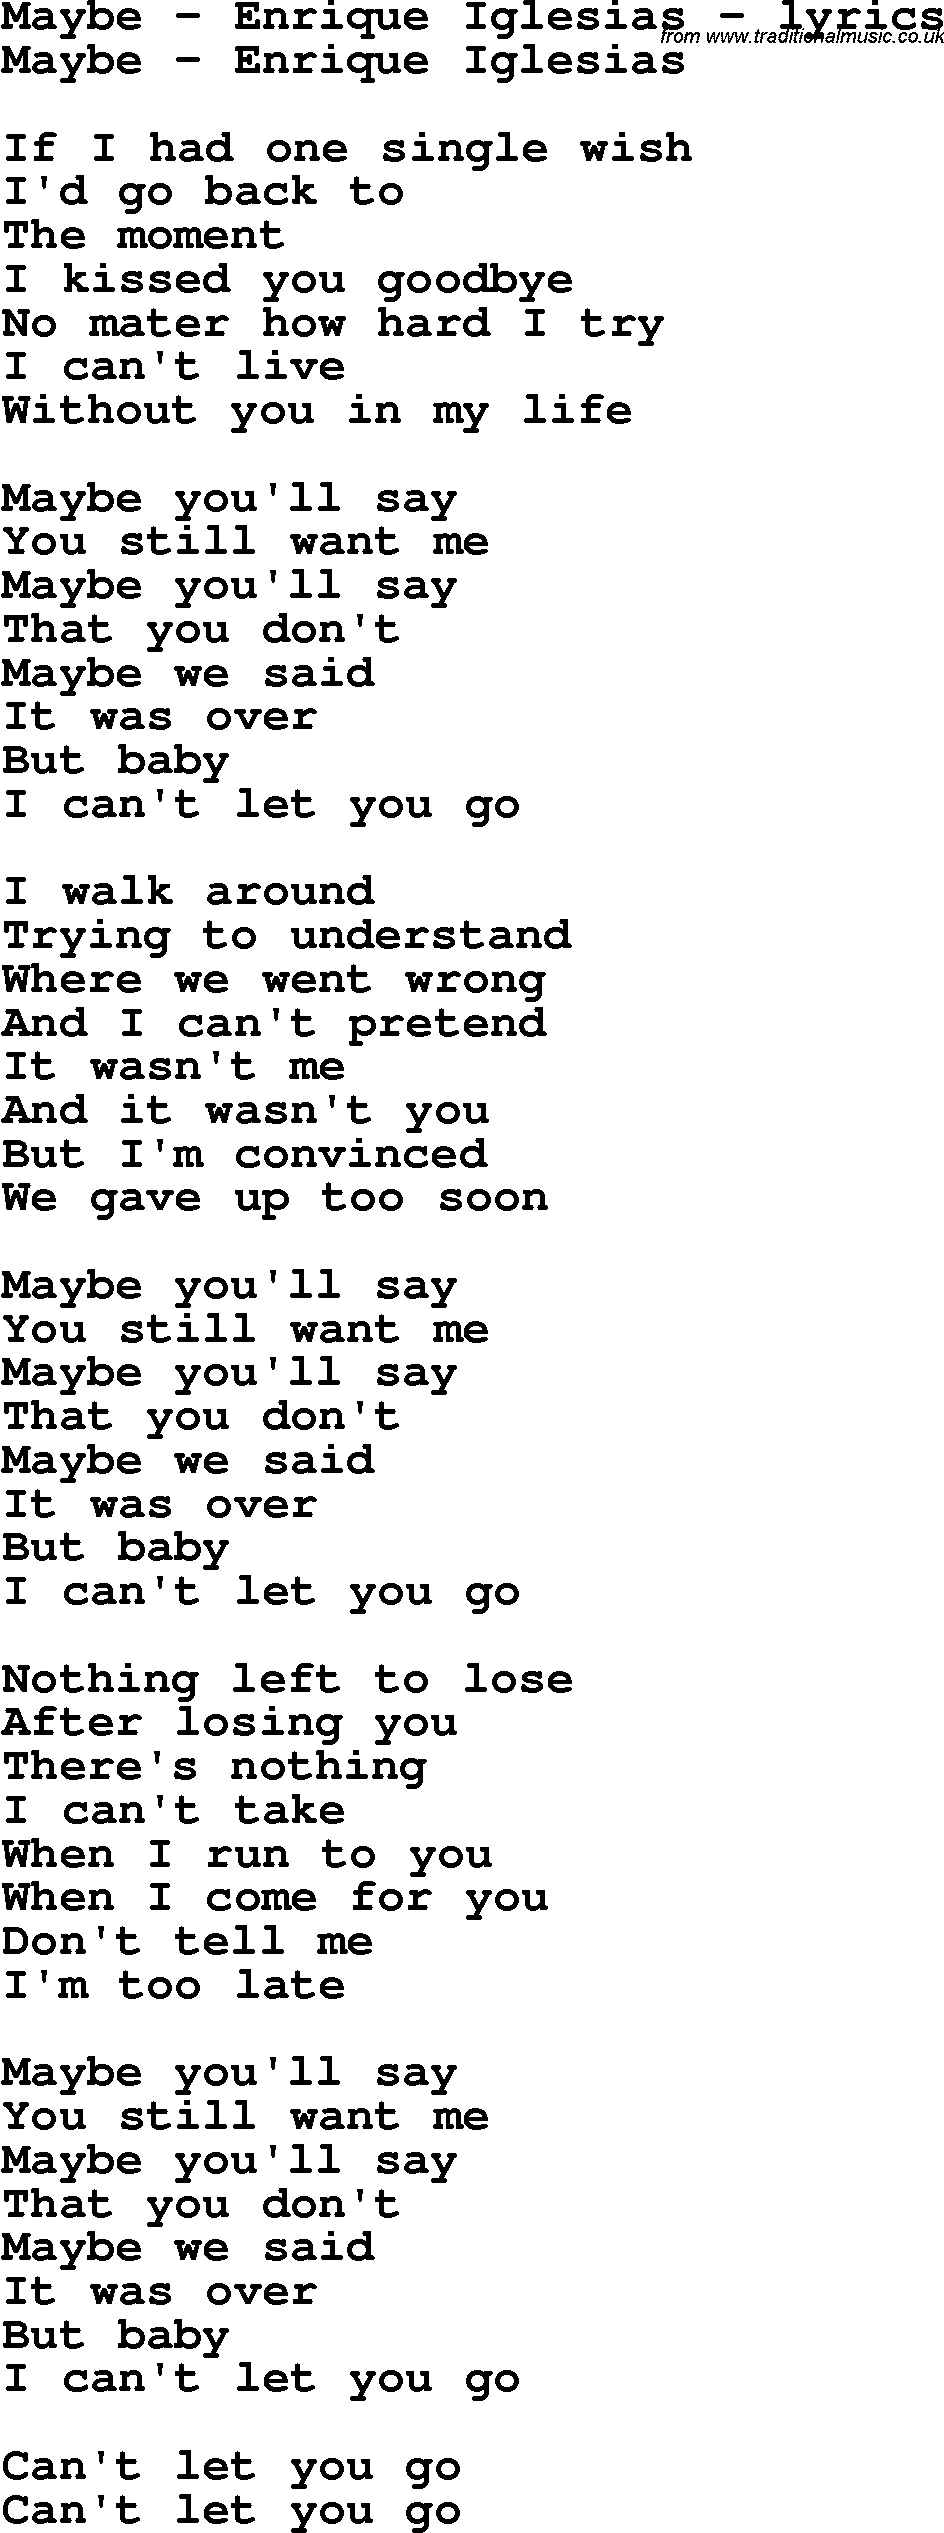 Love Song Lyrics for: Maybe - Enrique Iglesias